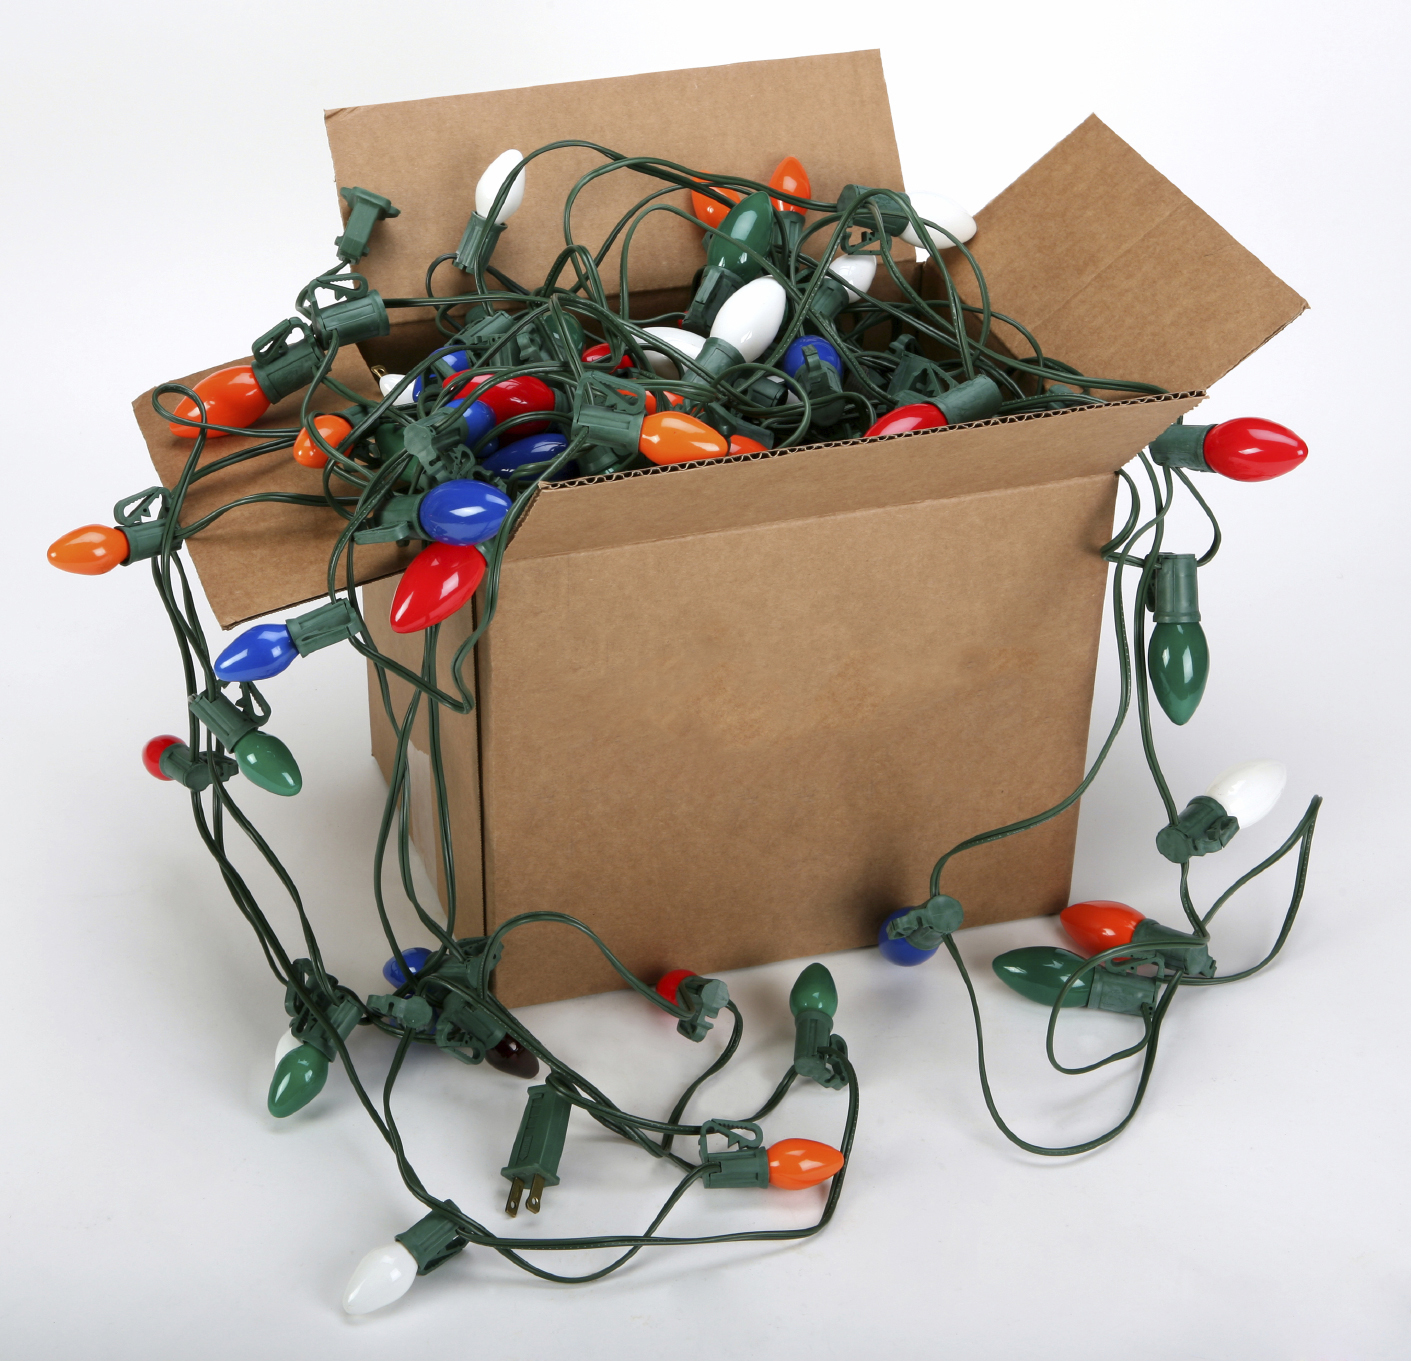 Multicolored holiday string lights in a box